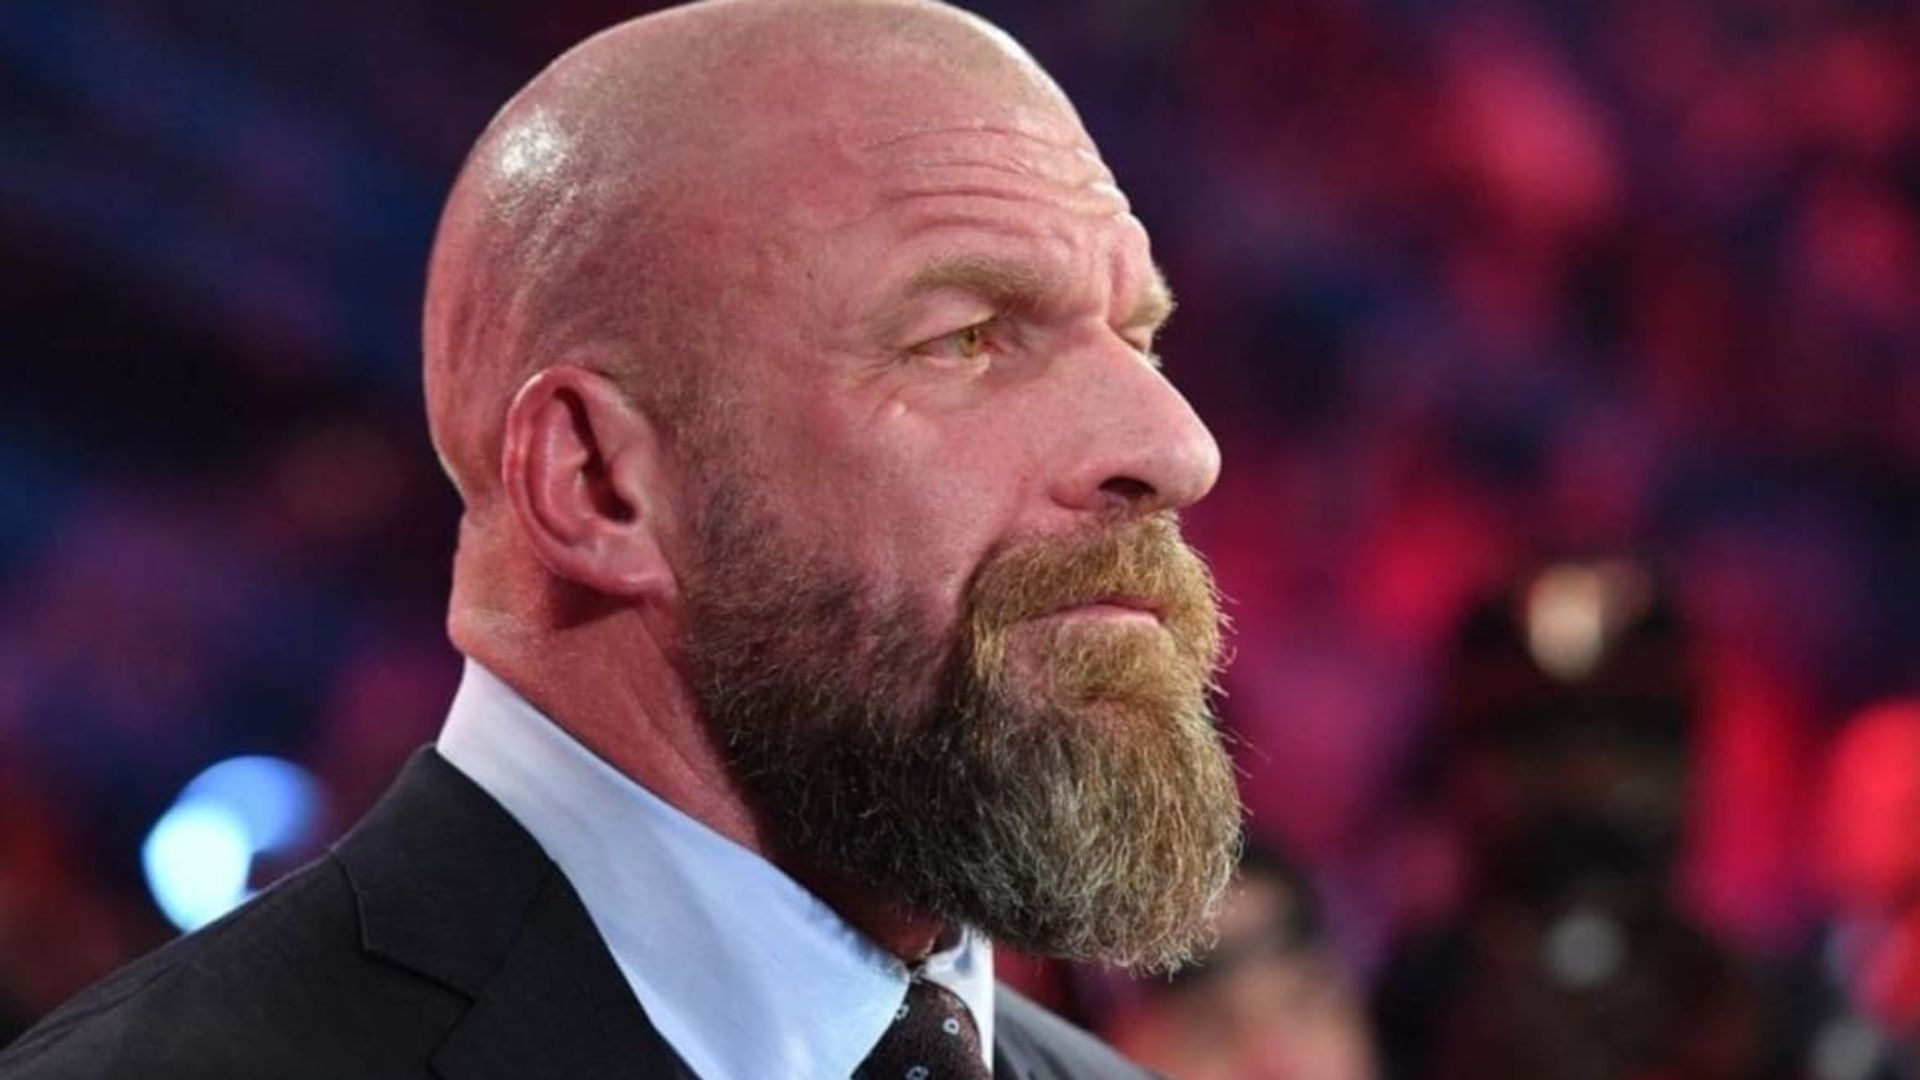 Triple H was recently named Chief Content Officer for WWE